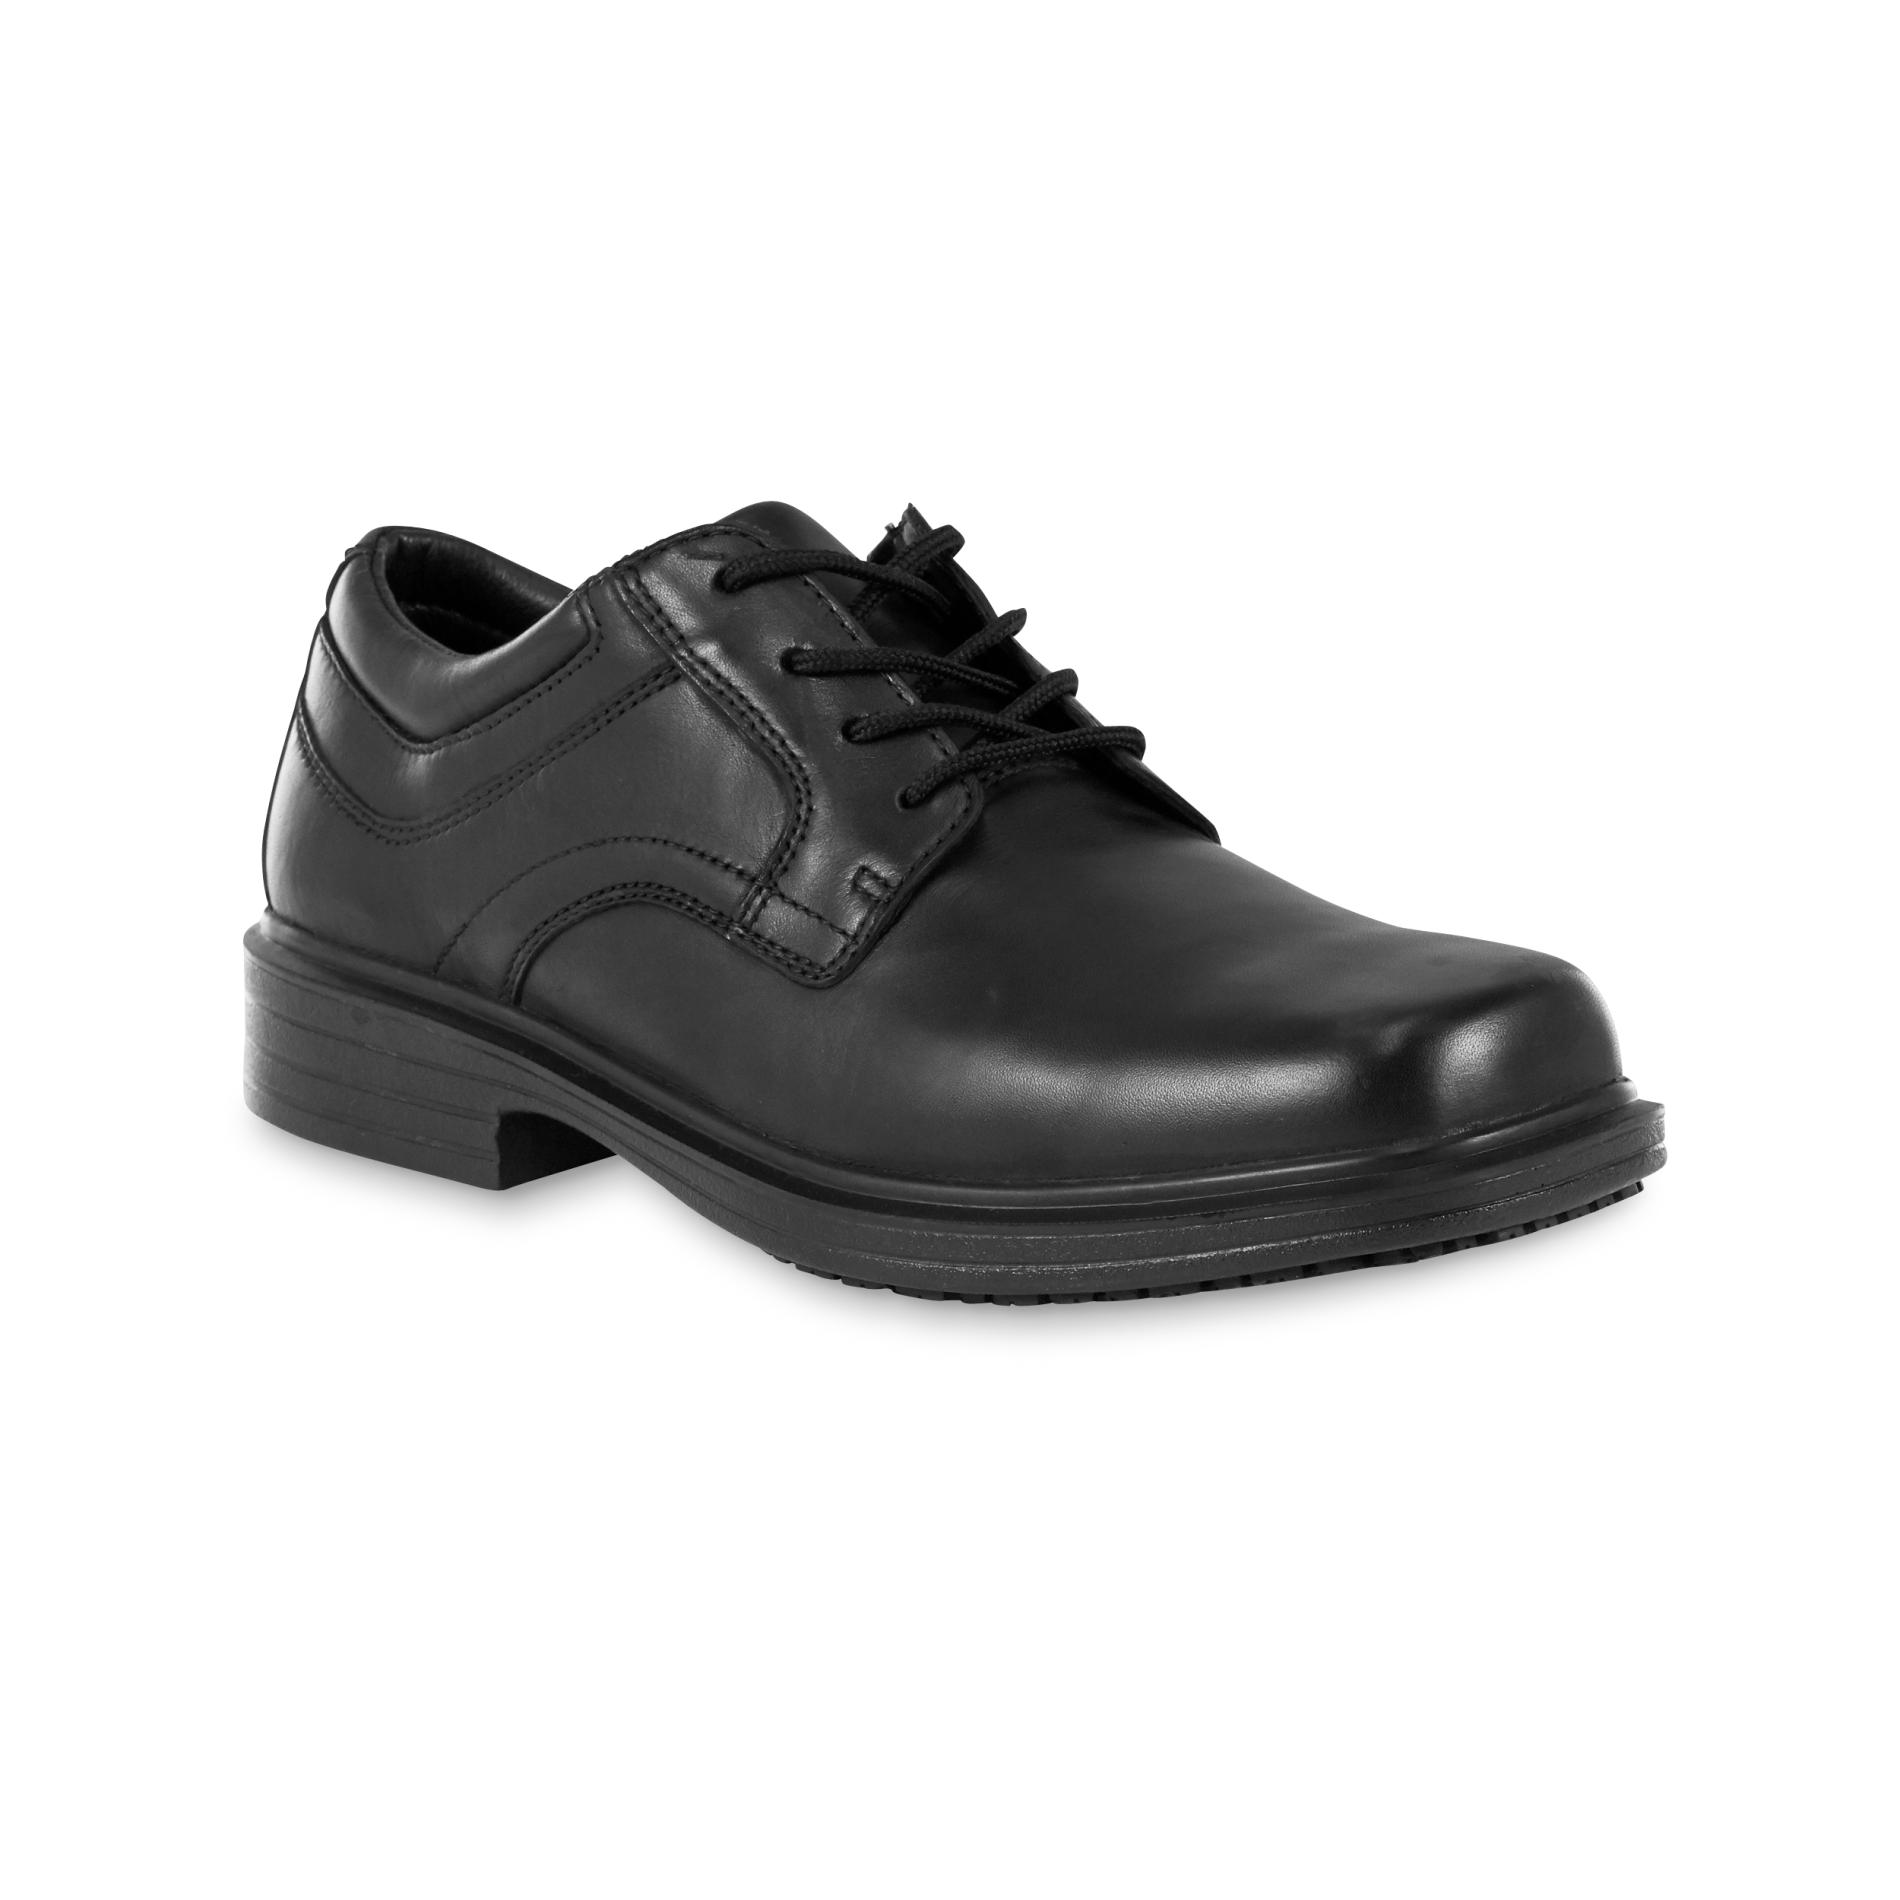 oxford work shoes